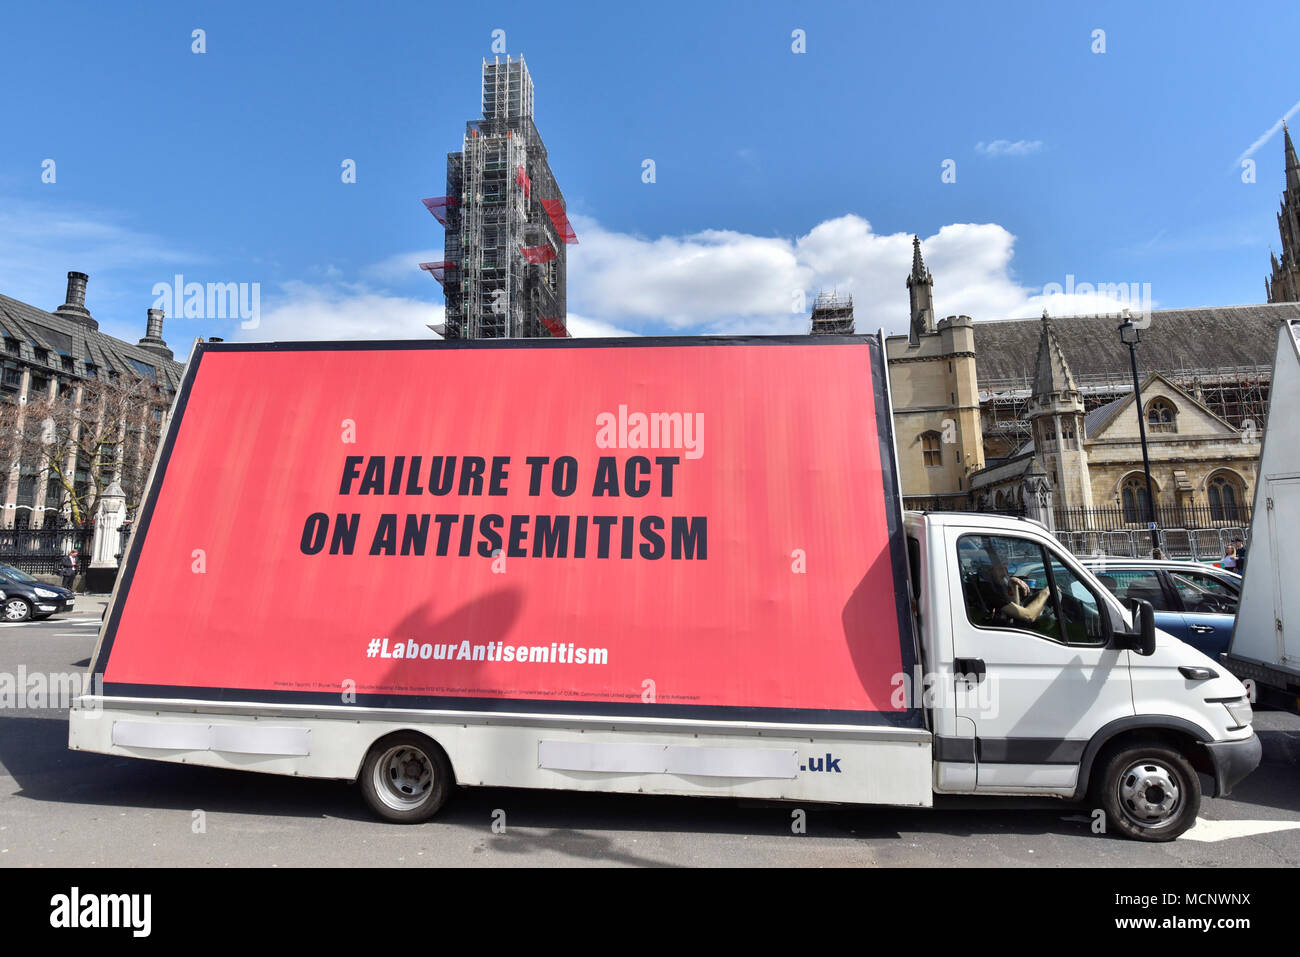 London, UK. 17 April 2018. Three vans, each carrying a mobile billboard  bearing a message protesting against anti-semitism within the Labour party,  drive around Parliament Square causing traffic disruption. Credit: Stephen  Chung /